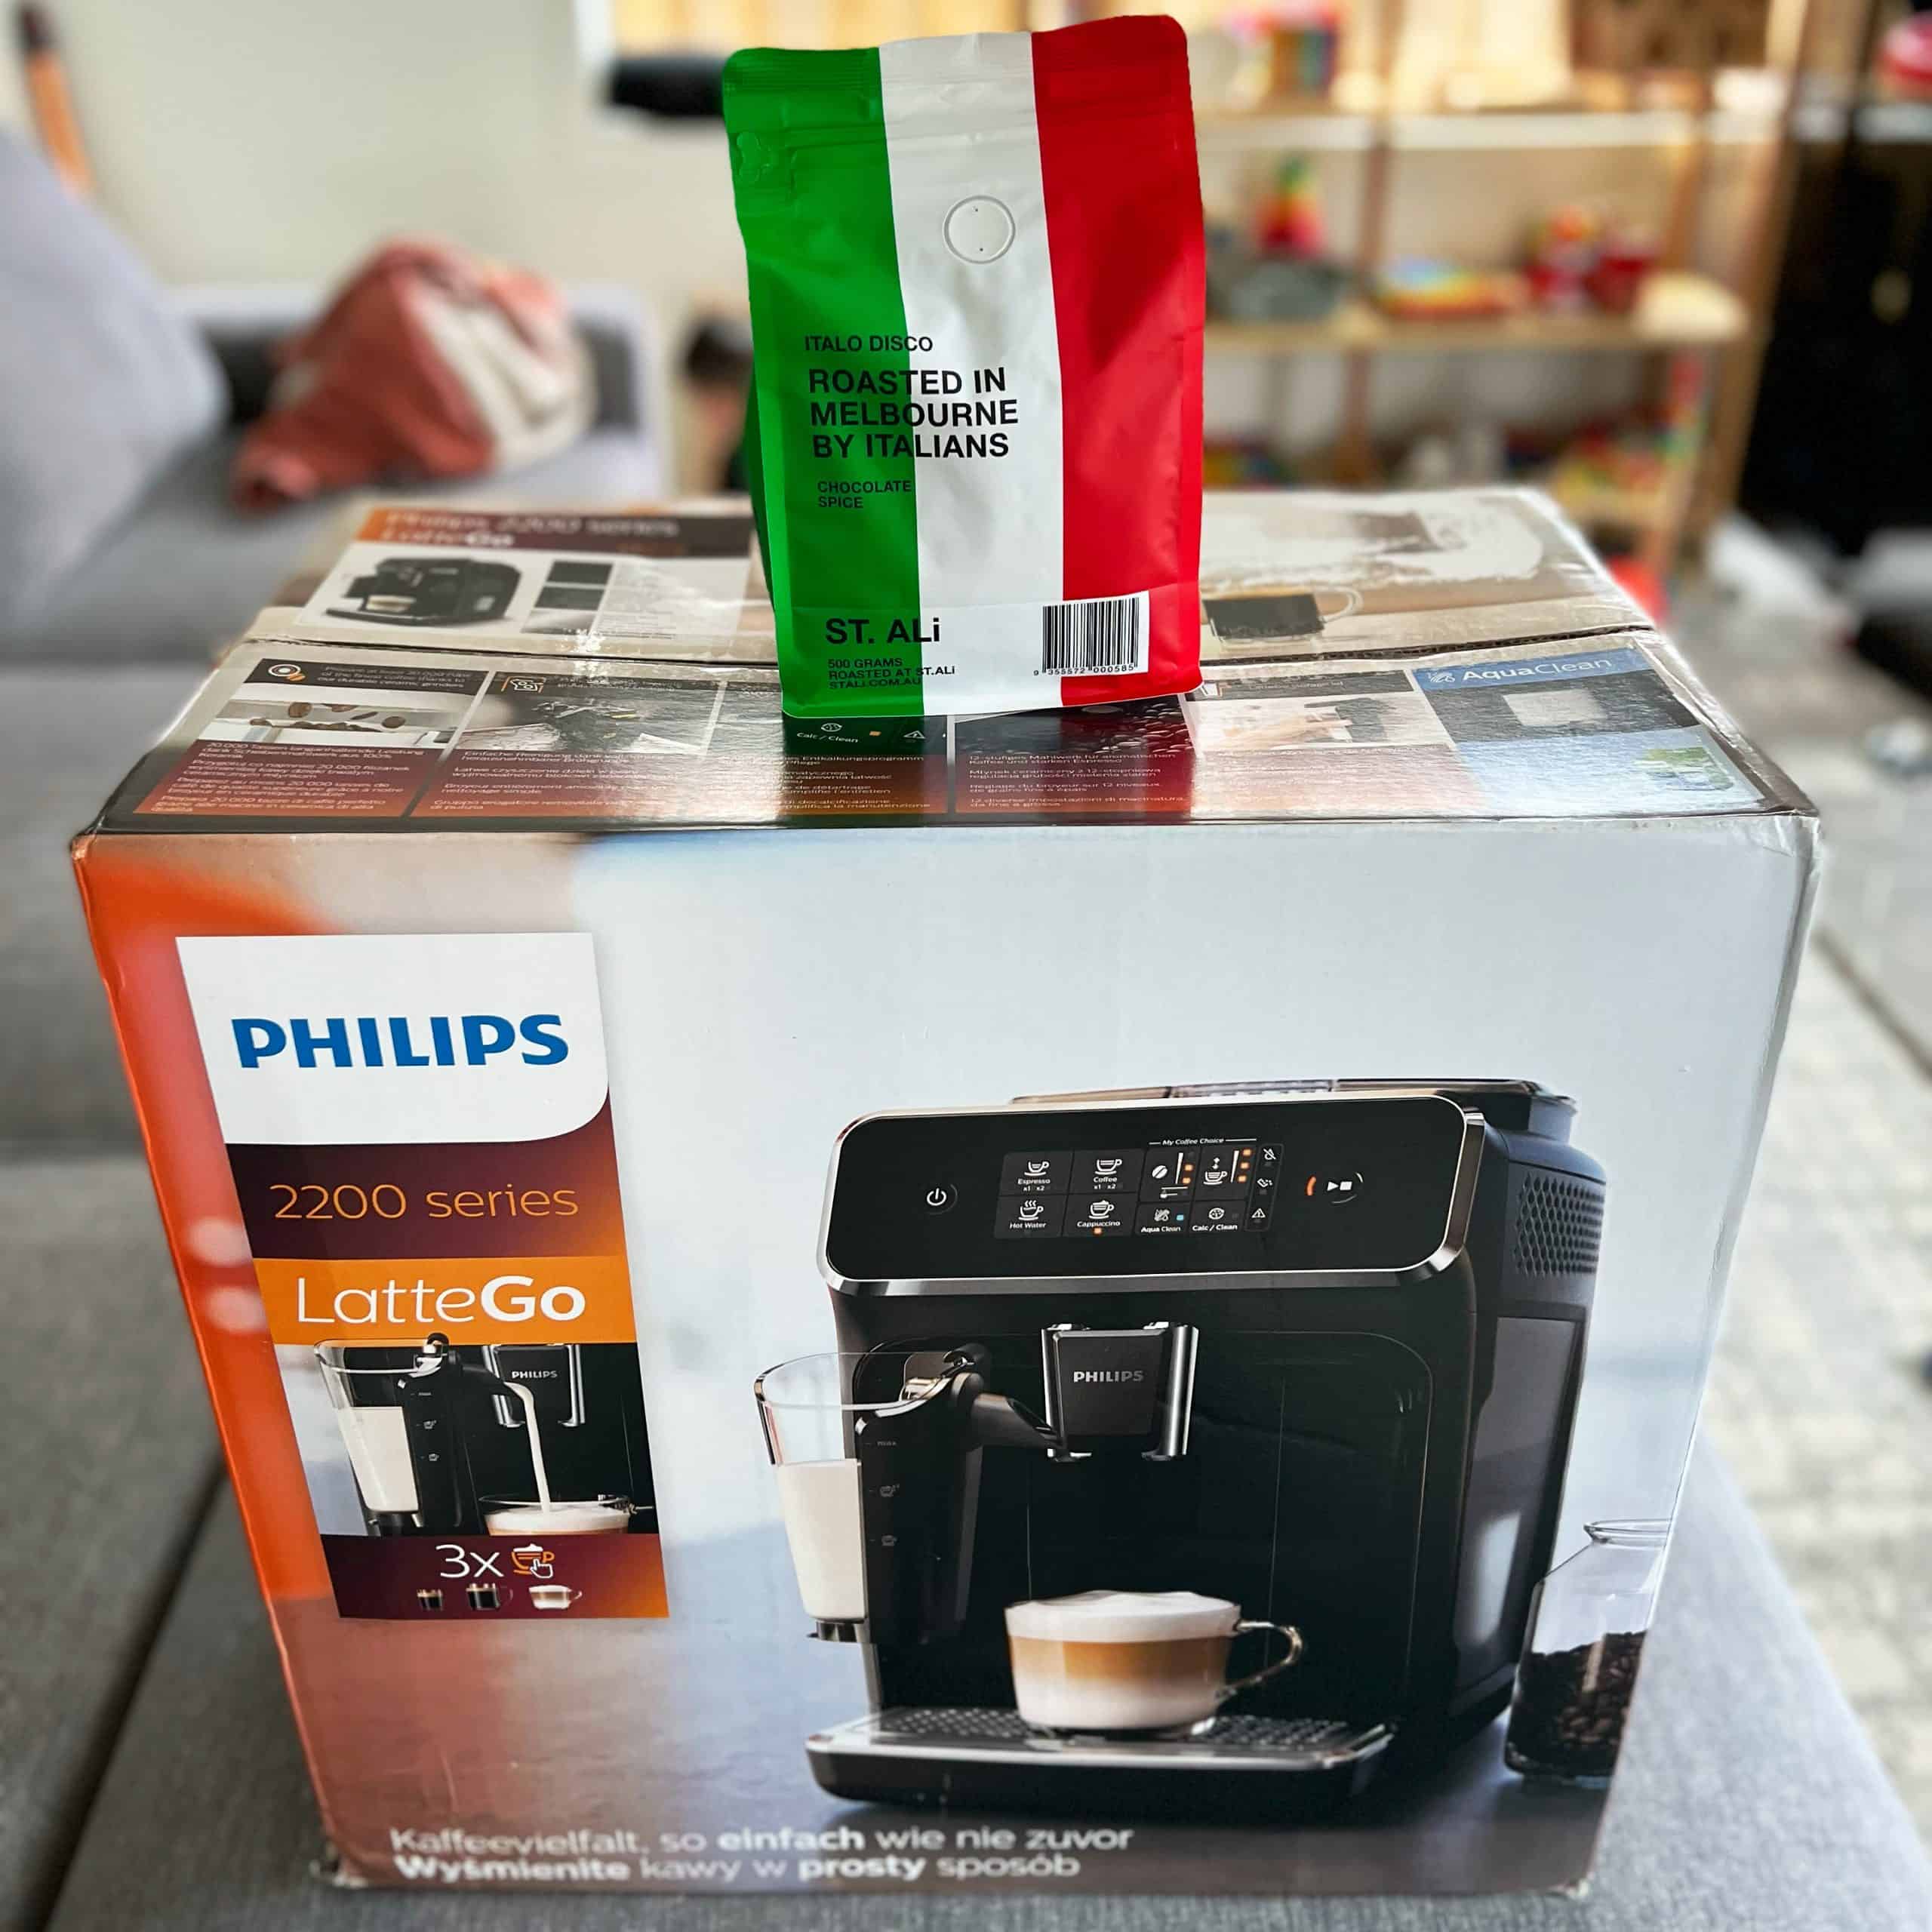 Philips 2200 automatic espresso machine with LatteGo milk frother review